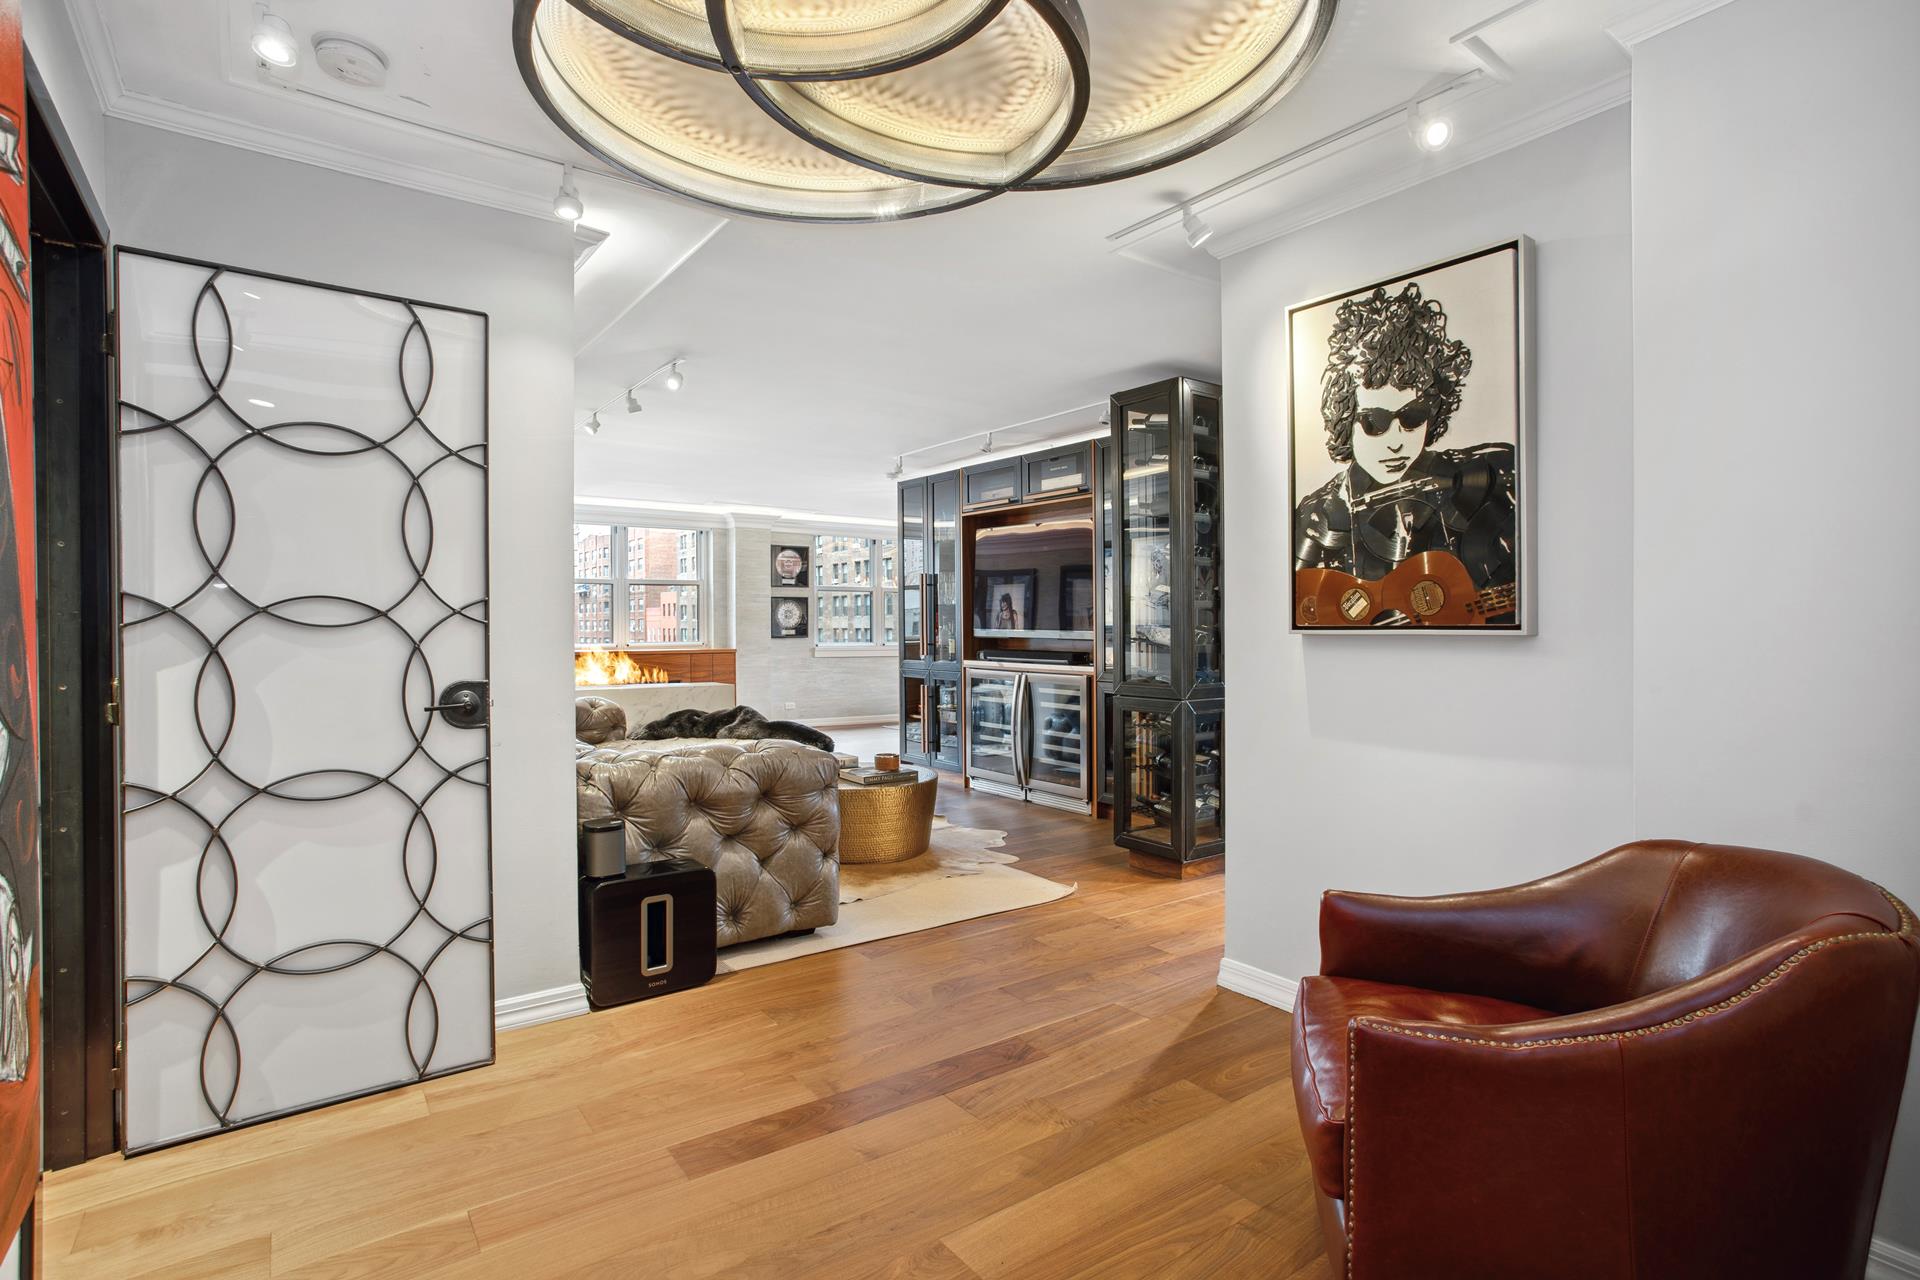 239 East 79th Street 5F, Yorkville, Upper East Side, NYC - 2 Bedrooms  
2 Bathrooms  
5 Rooms - 